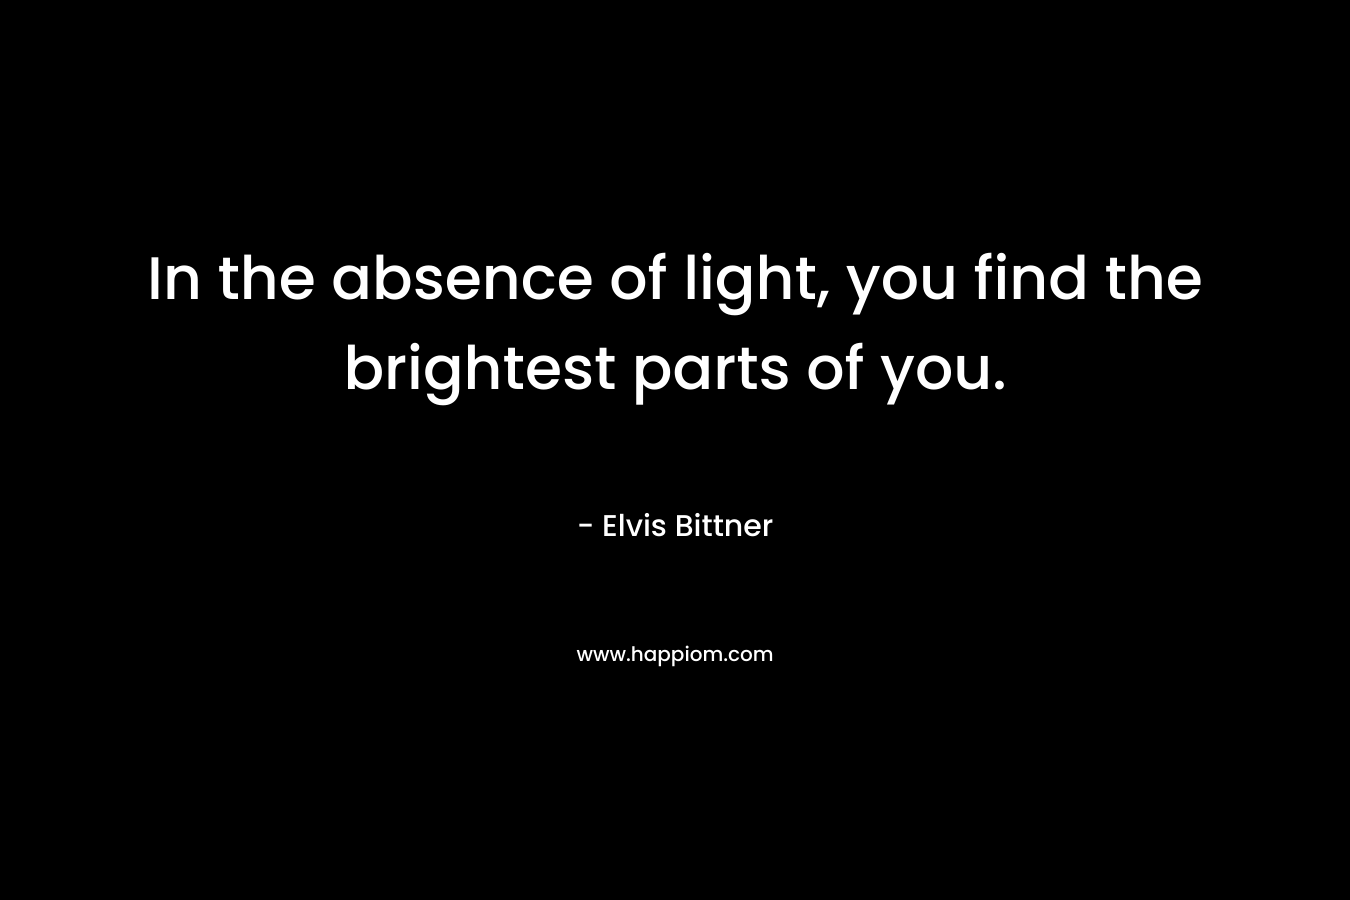 In the absence of light, you find the brightest parts of you.